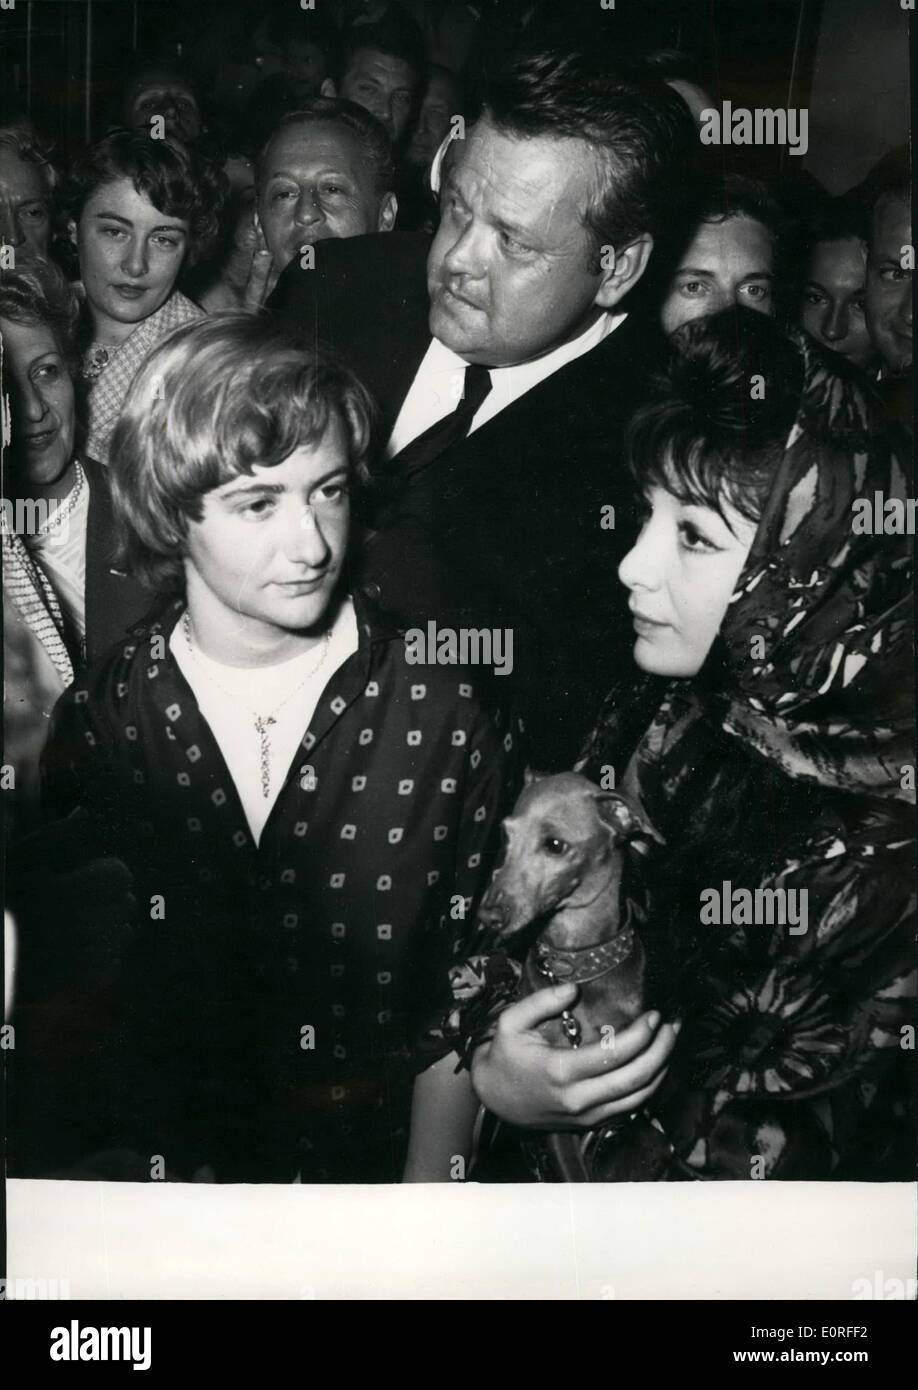 May 05, 1959 - Cannes film festival; Orson Welles photographed with Francoise Sagan and Juliette Greco holding a dog given to her by Daryl Zanuch. Orson Welles shown film ''Compulsion'' scored a great success. Francoise Sagan is said to be negotiating with Zanuck and Welles for a film based on one of her latest novels. Stock Photo